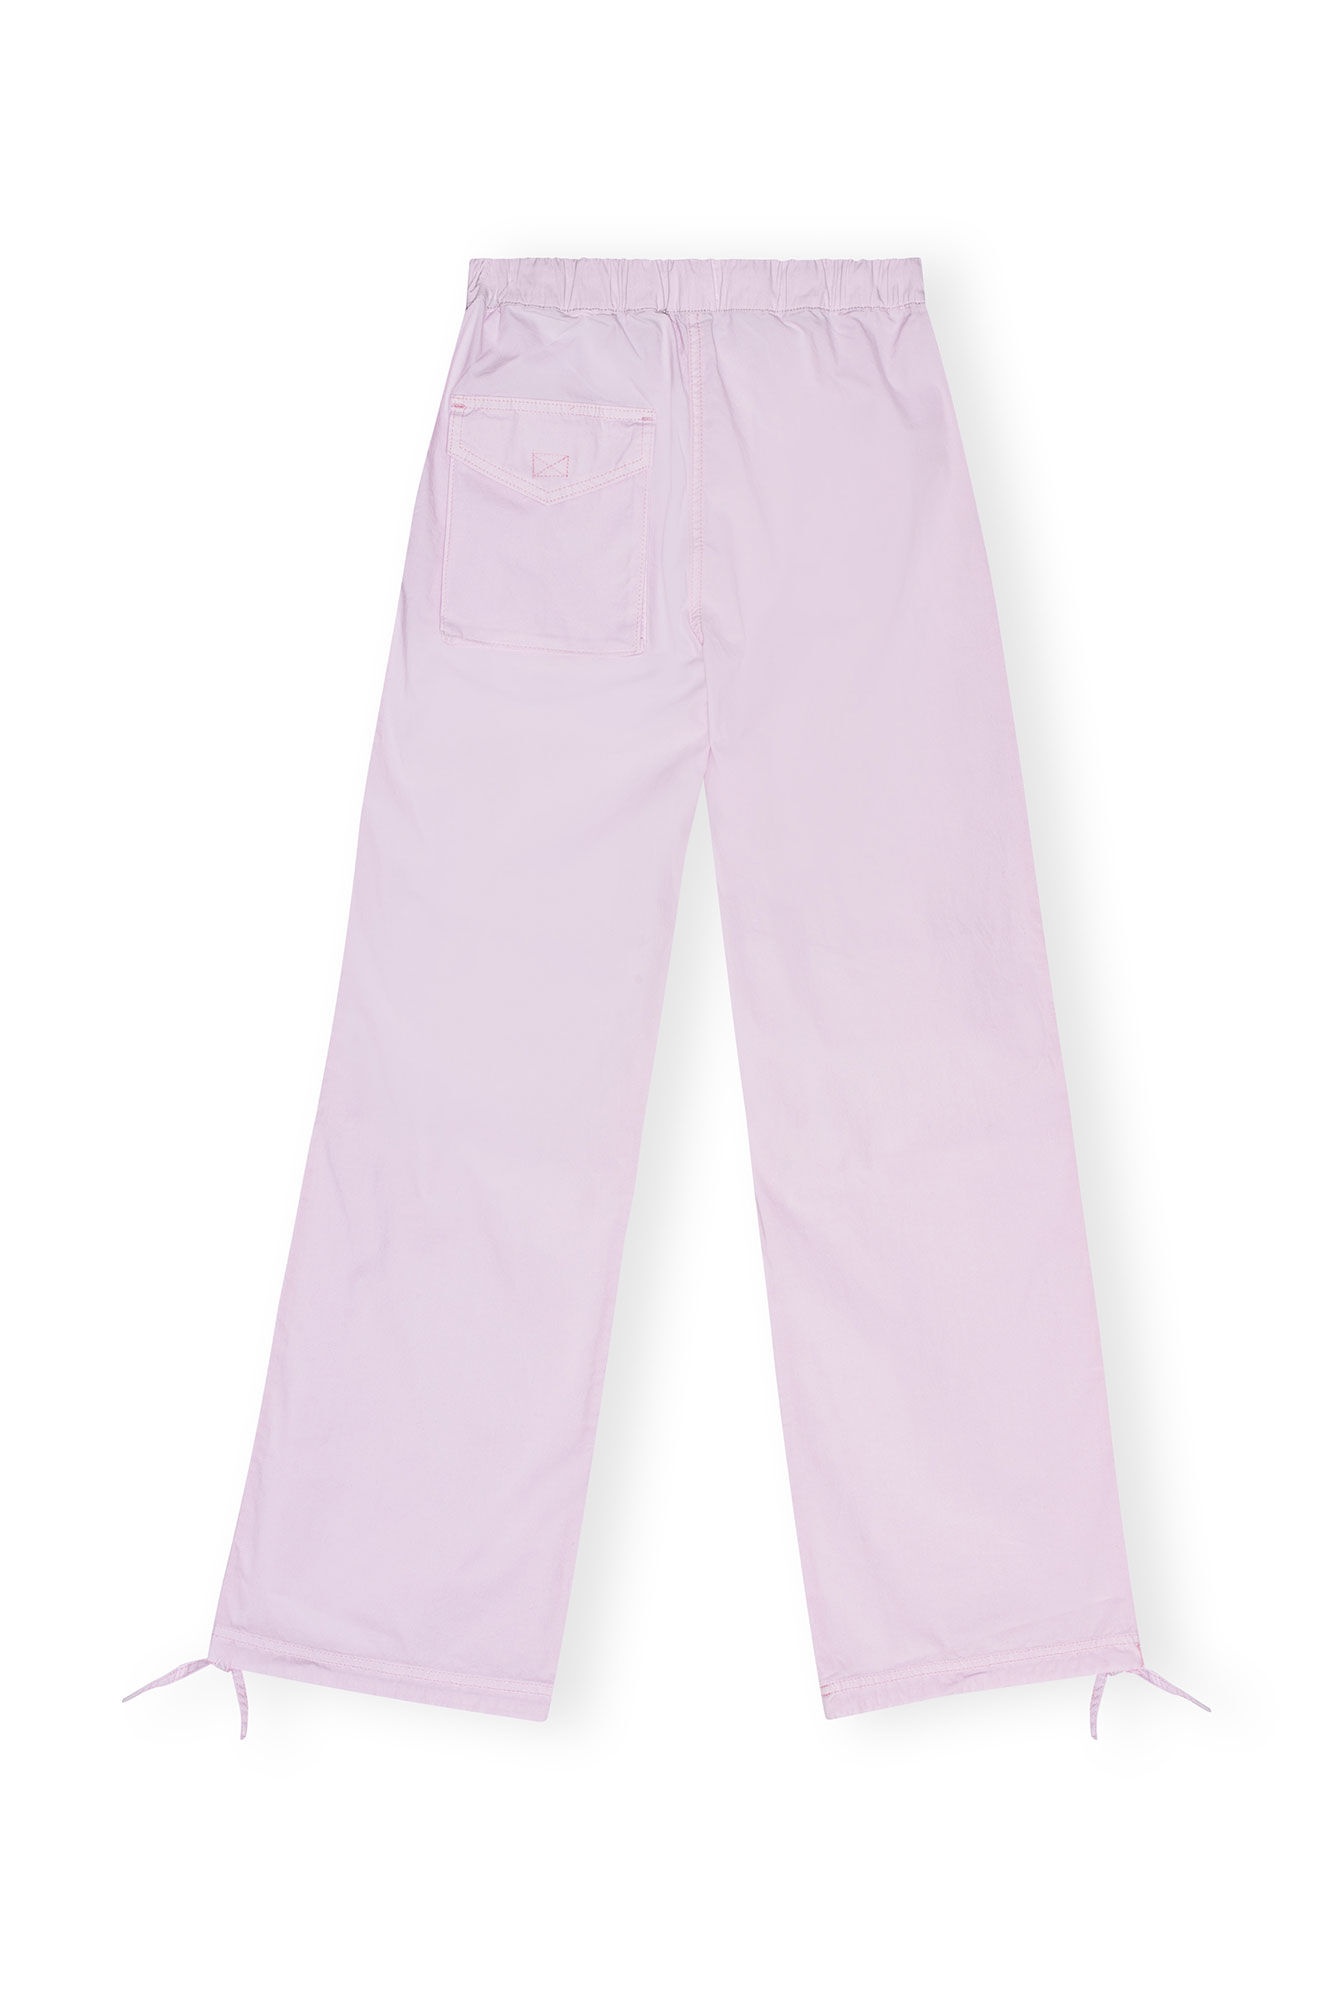 LIGHT LILAC WASHED COTTON CANVAS DRAW STRING TROUSERS - 2